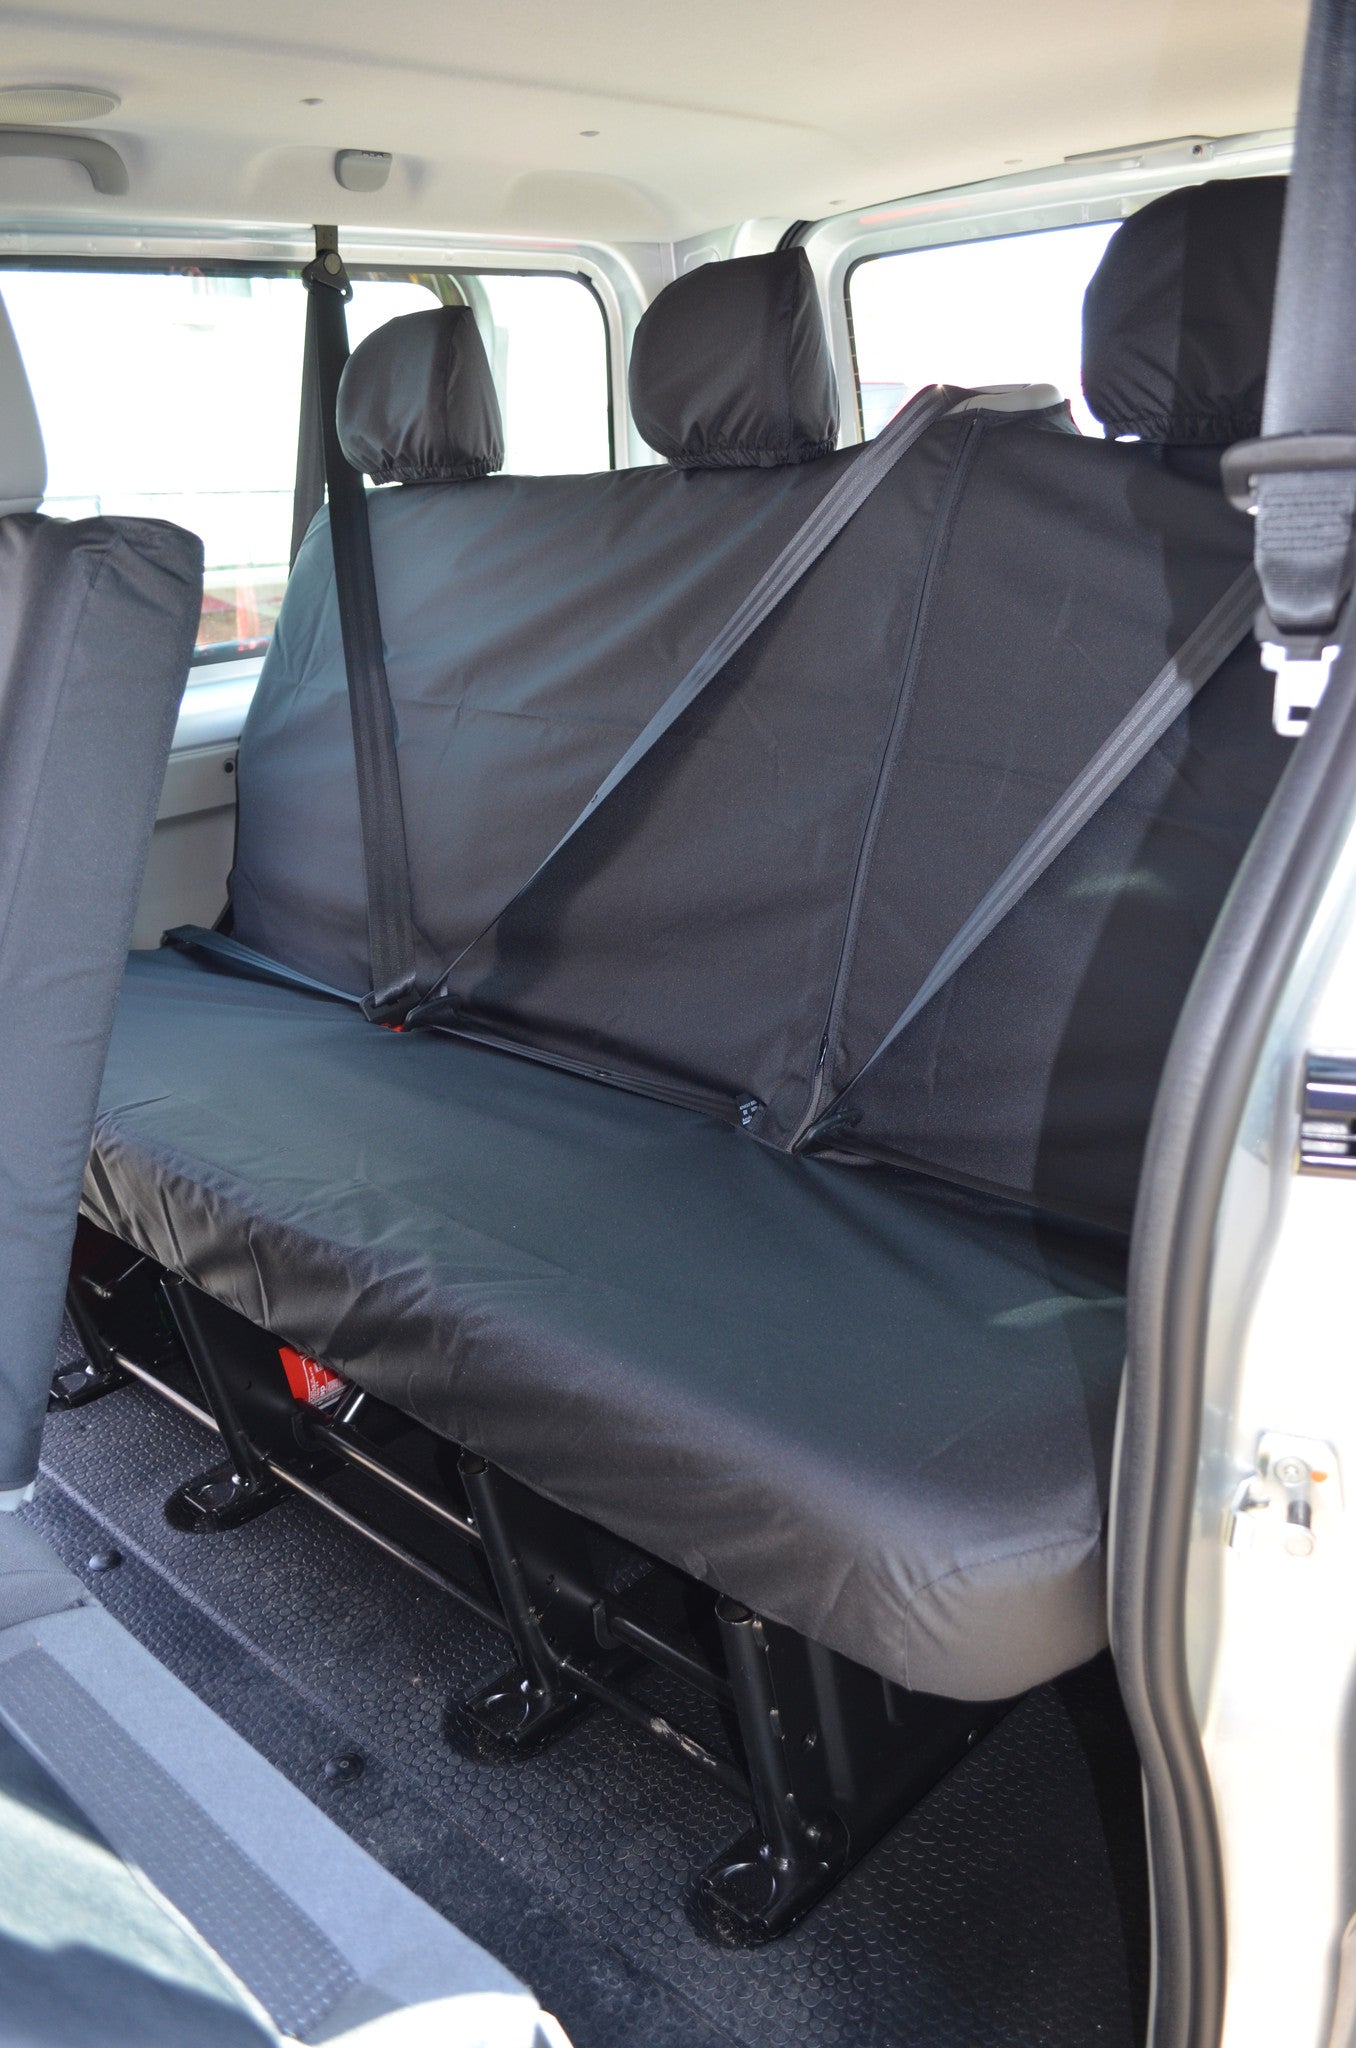 Renault Trafic Passenger 2006 - 2014 Seat Covers Black / 3rd Row Bench Turtle Covers Ltd